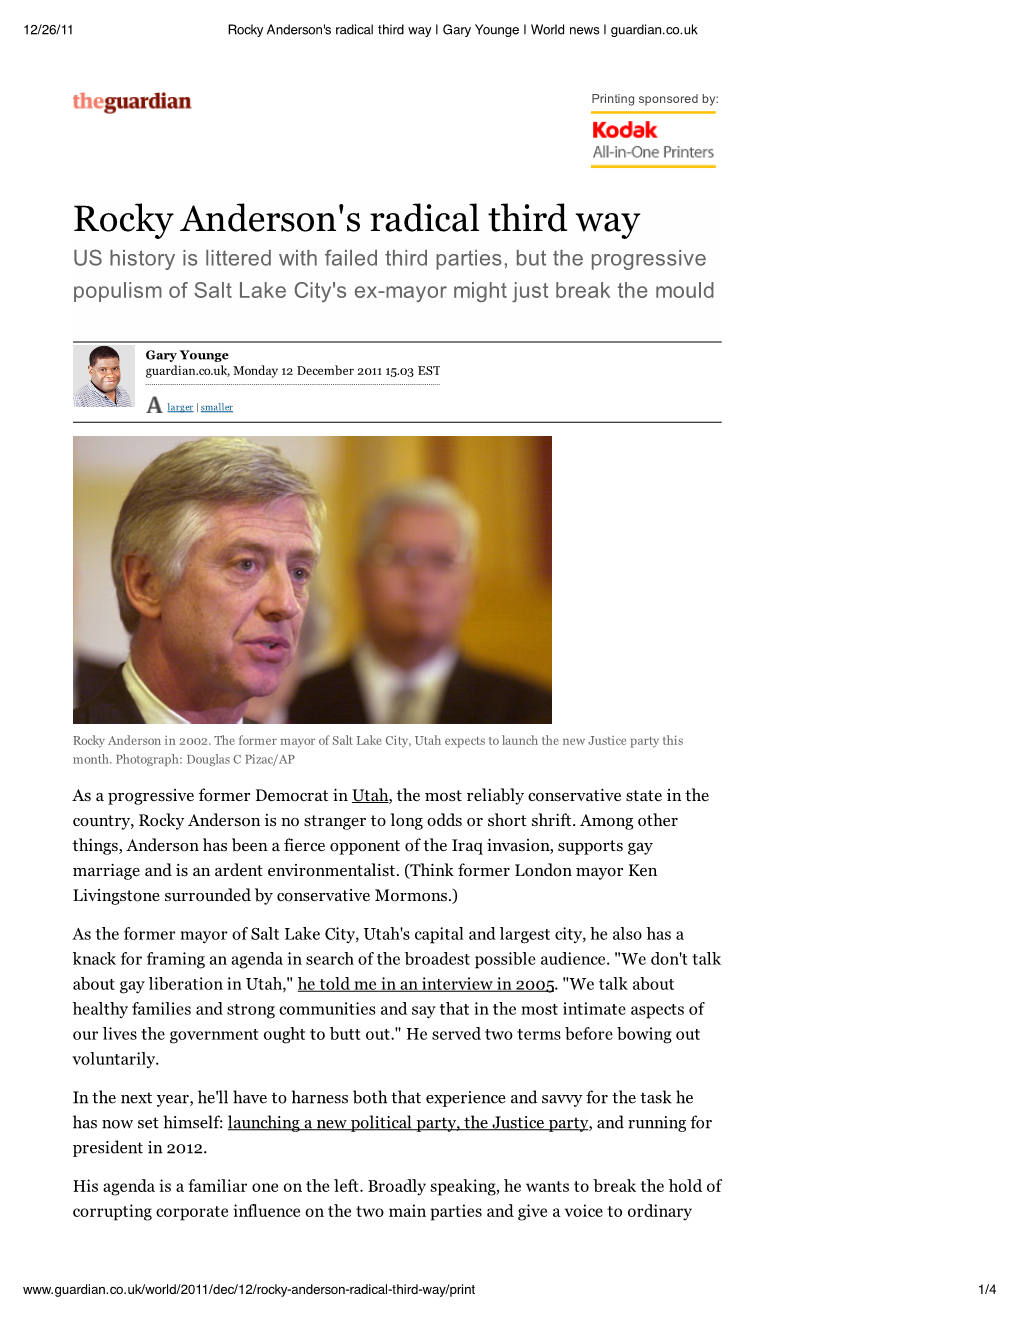 Rocky Anderson's Radical Third Way | Gary Younge | World News | Guardian.Co.Uk